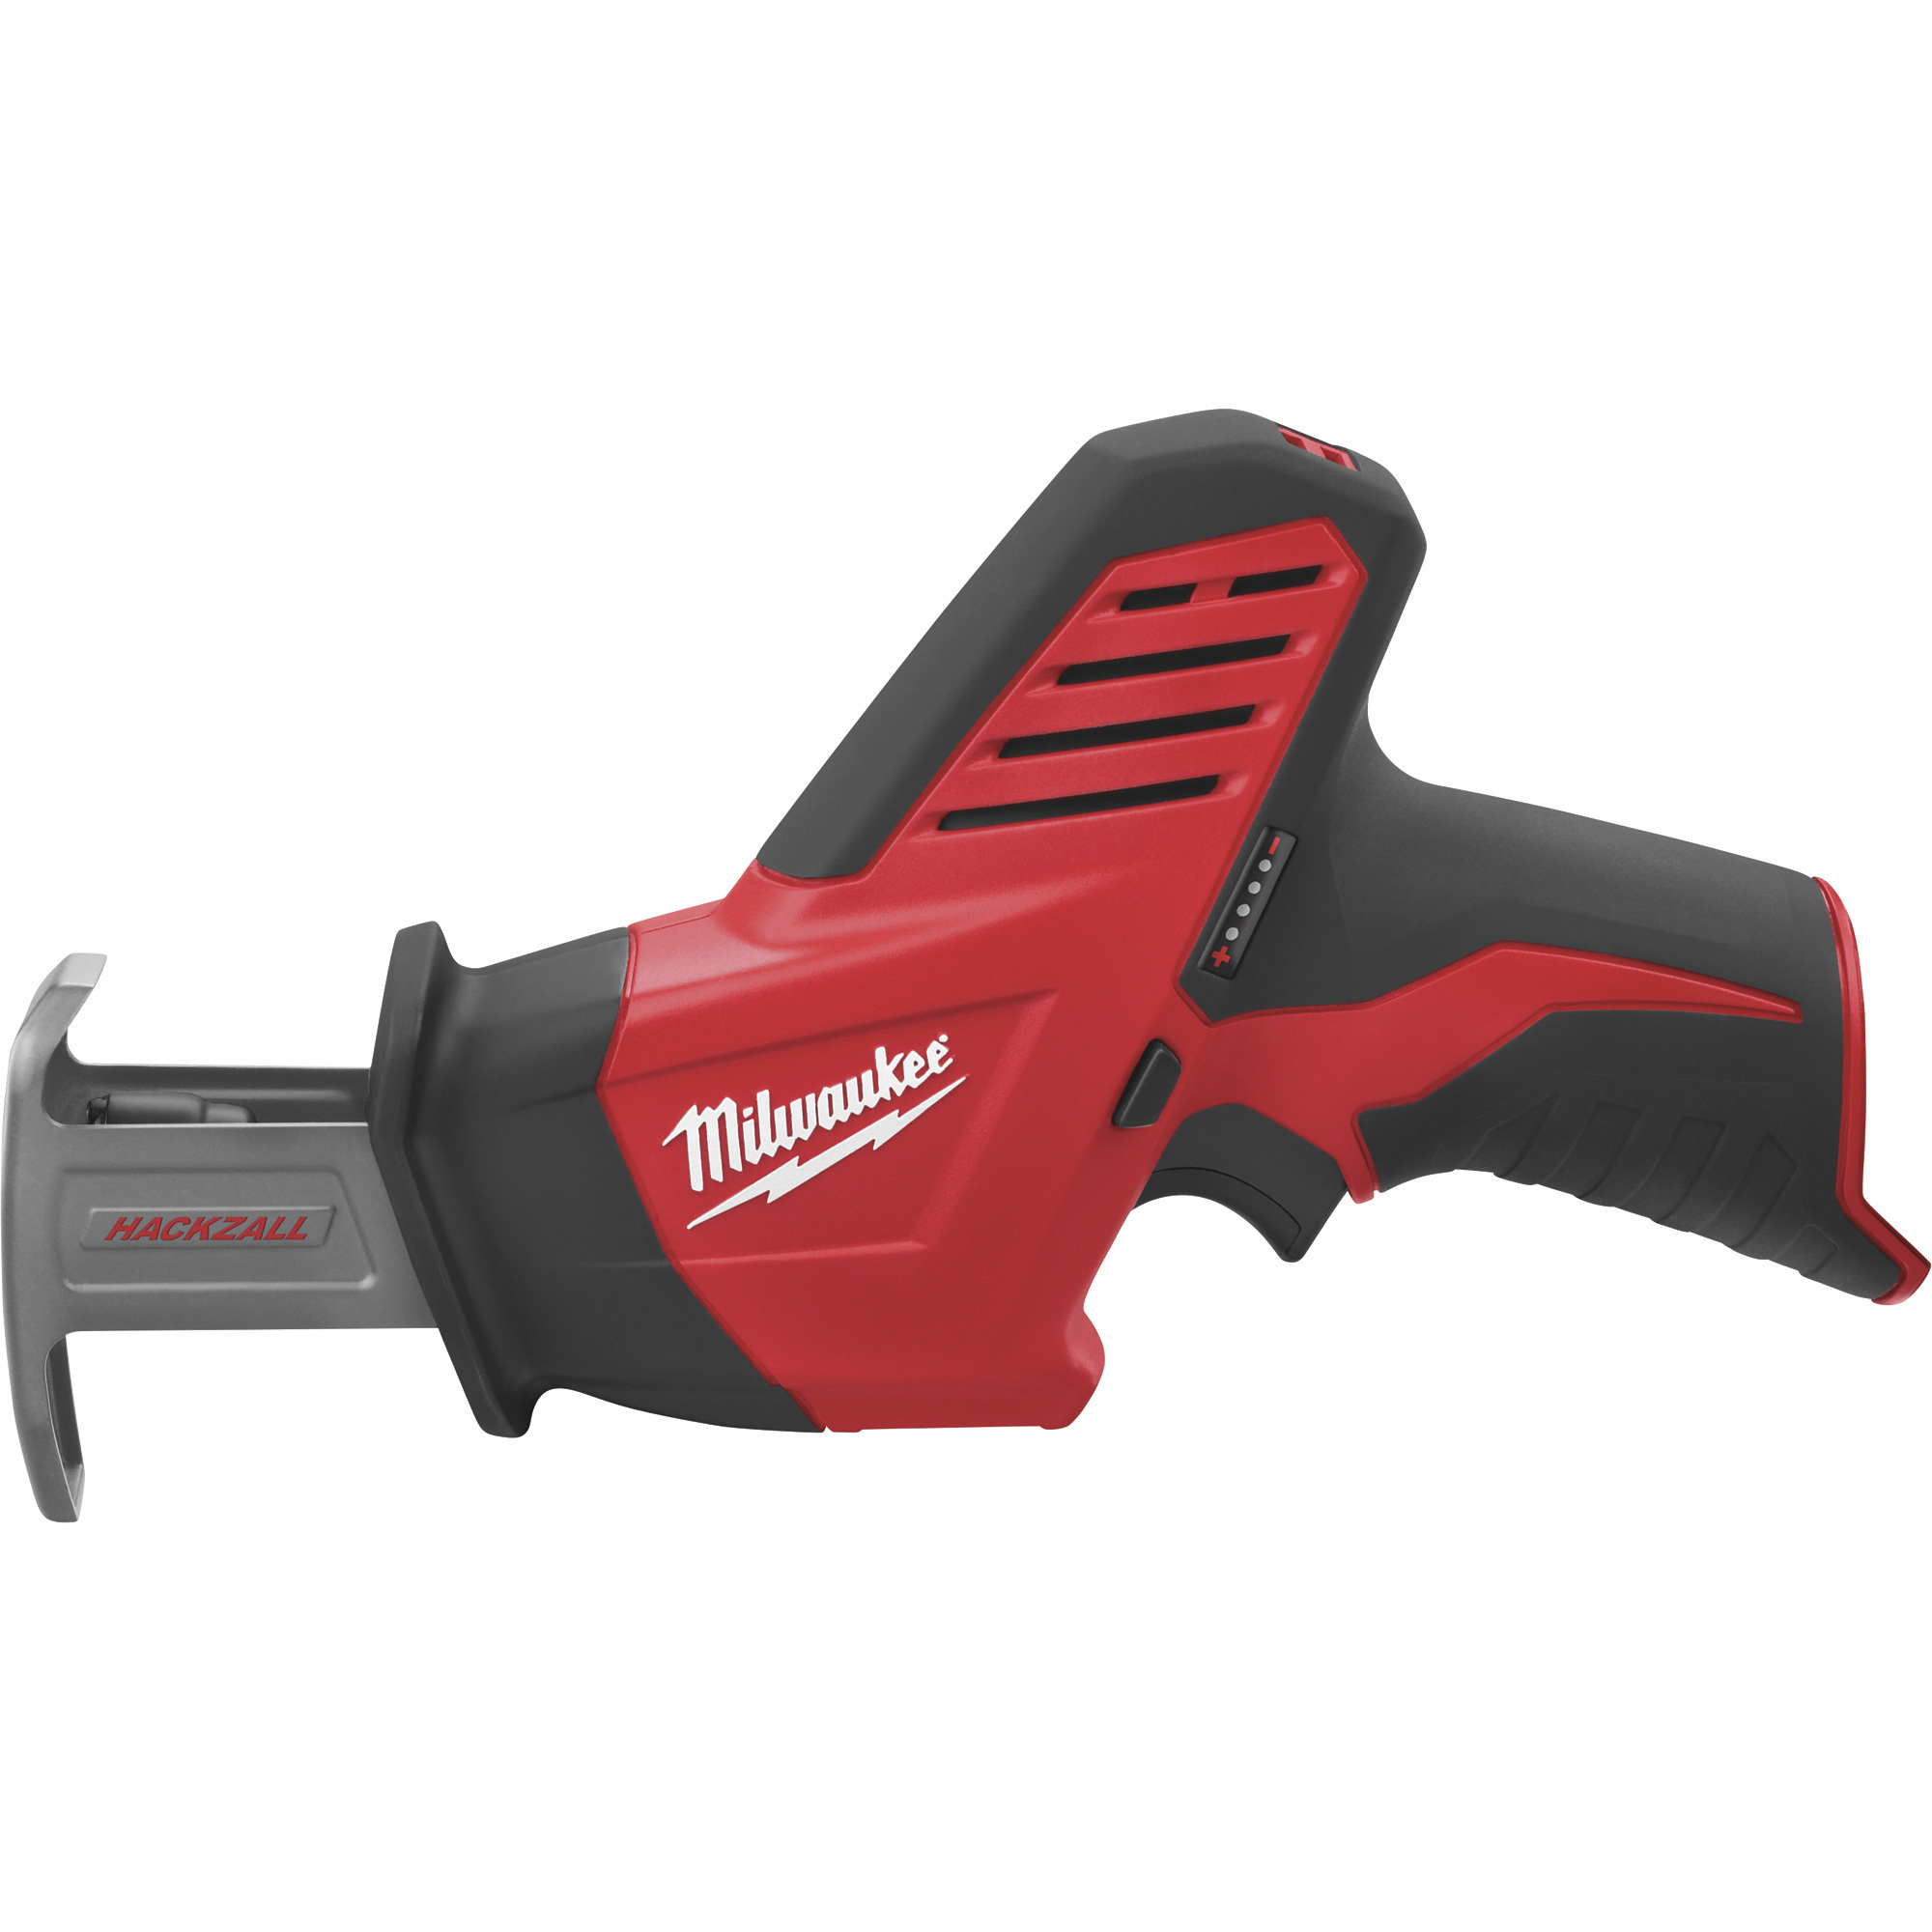 Milwaukee M12 12 Volt Hackzall Reciprocating Saw, Tool Only, Model 2420-20